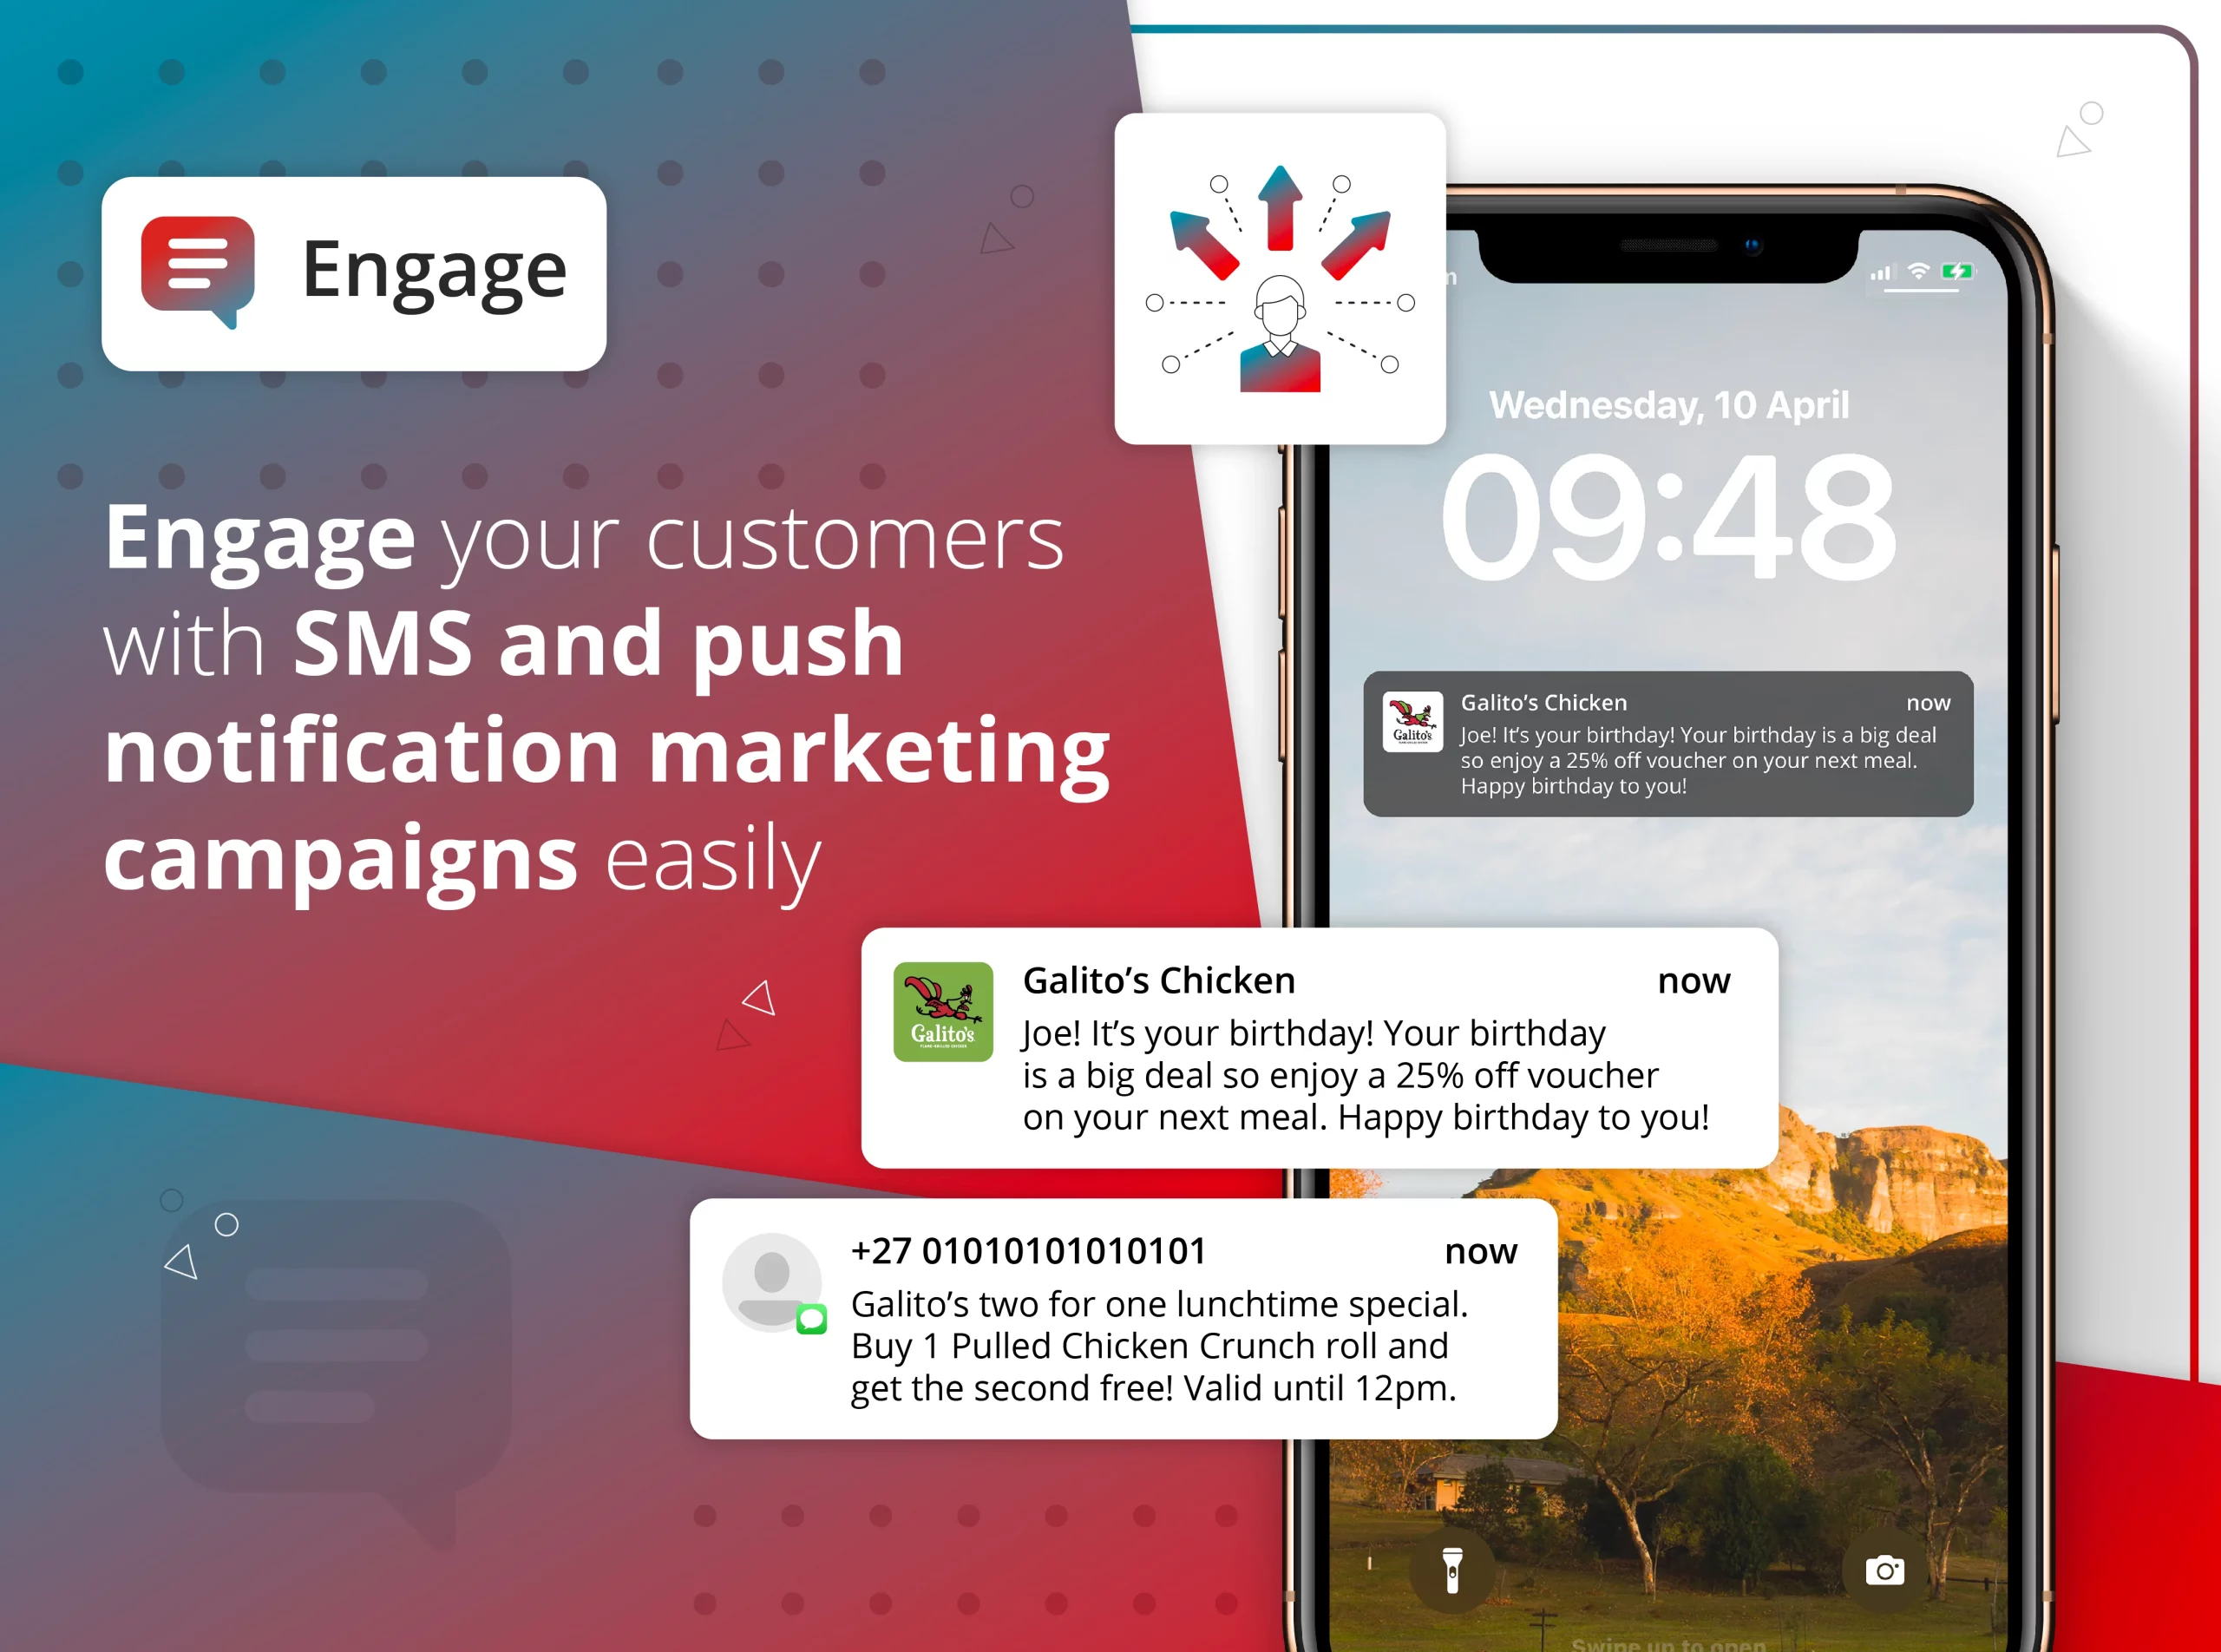 Engage your customers with SMS and push notification marketing campaigns easily